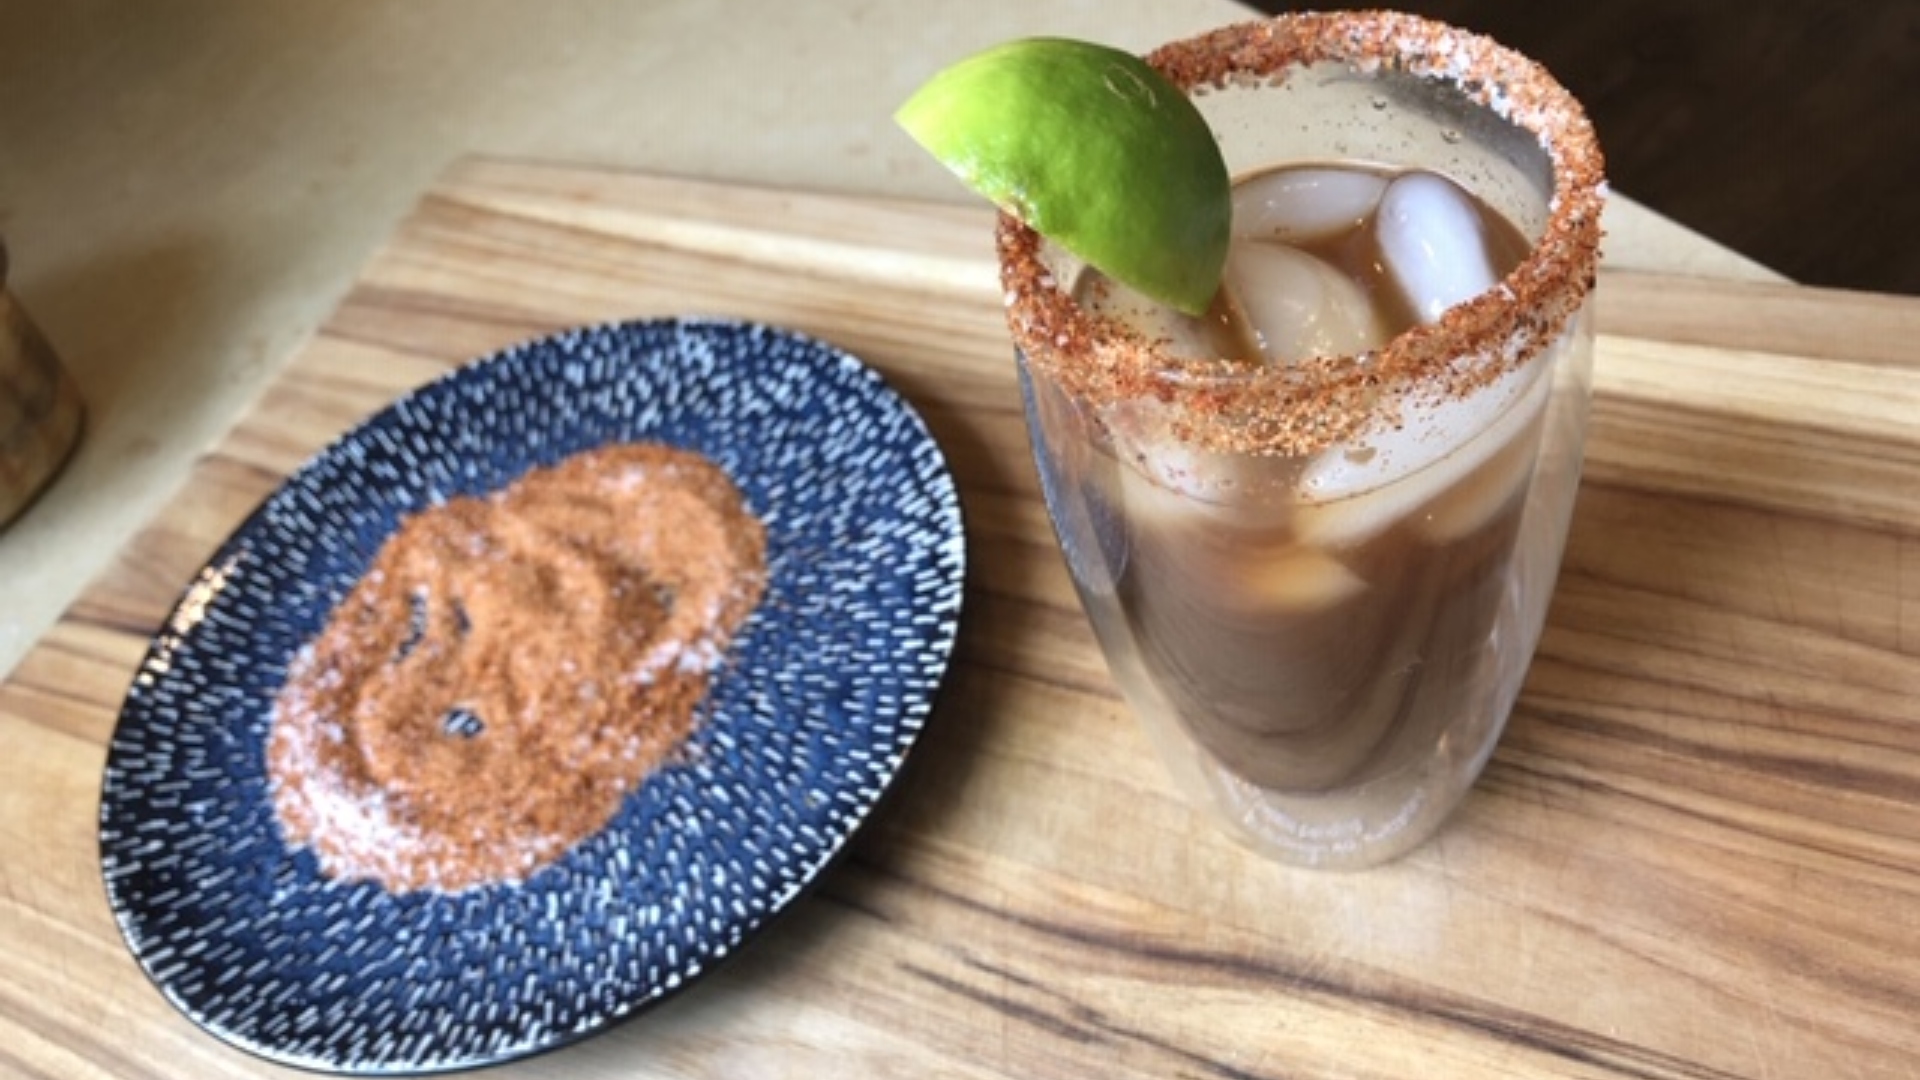 Dressed up Mexican beer (Michelada)